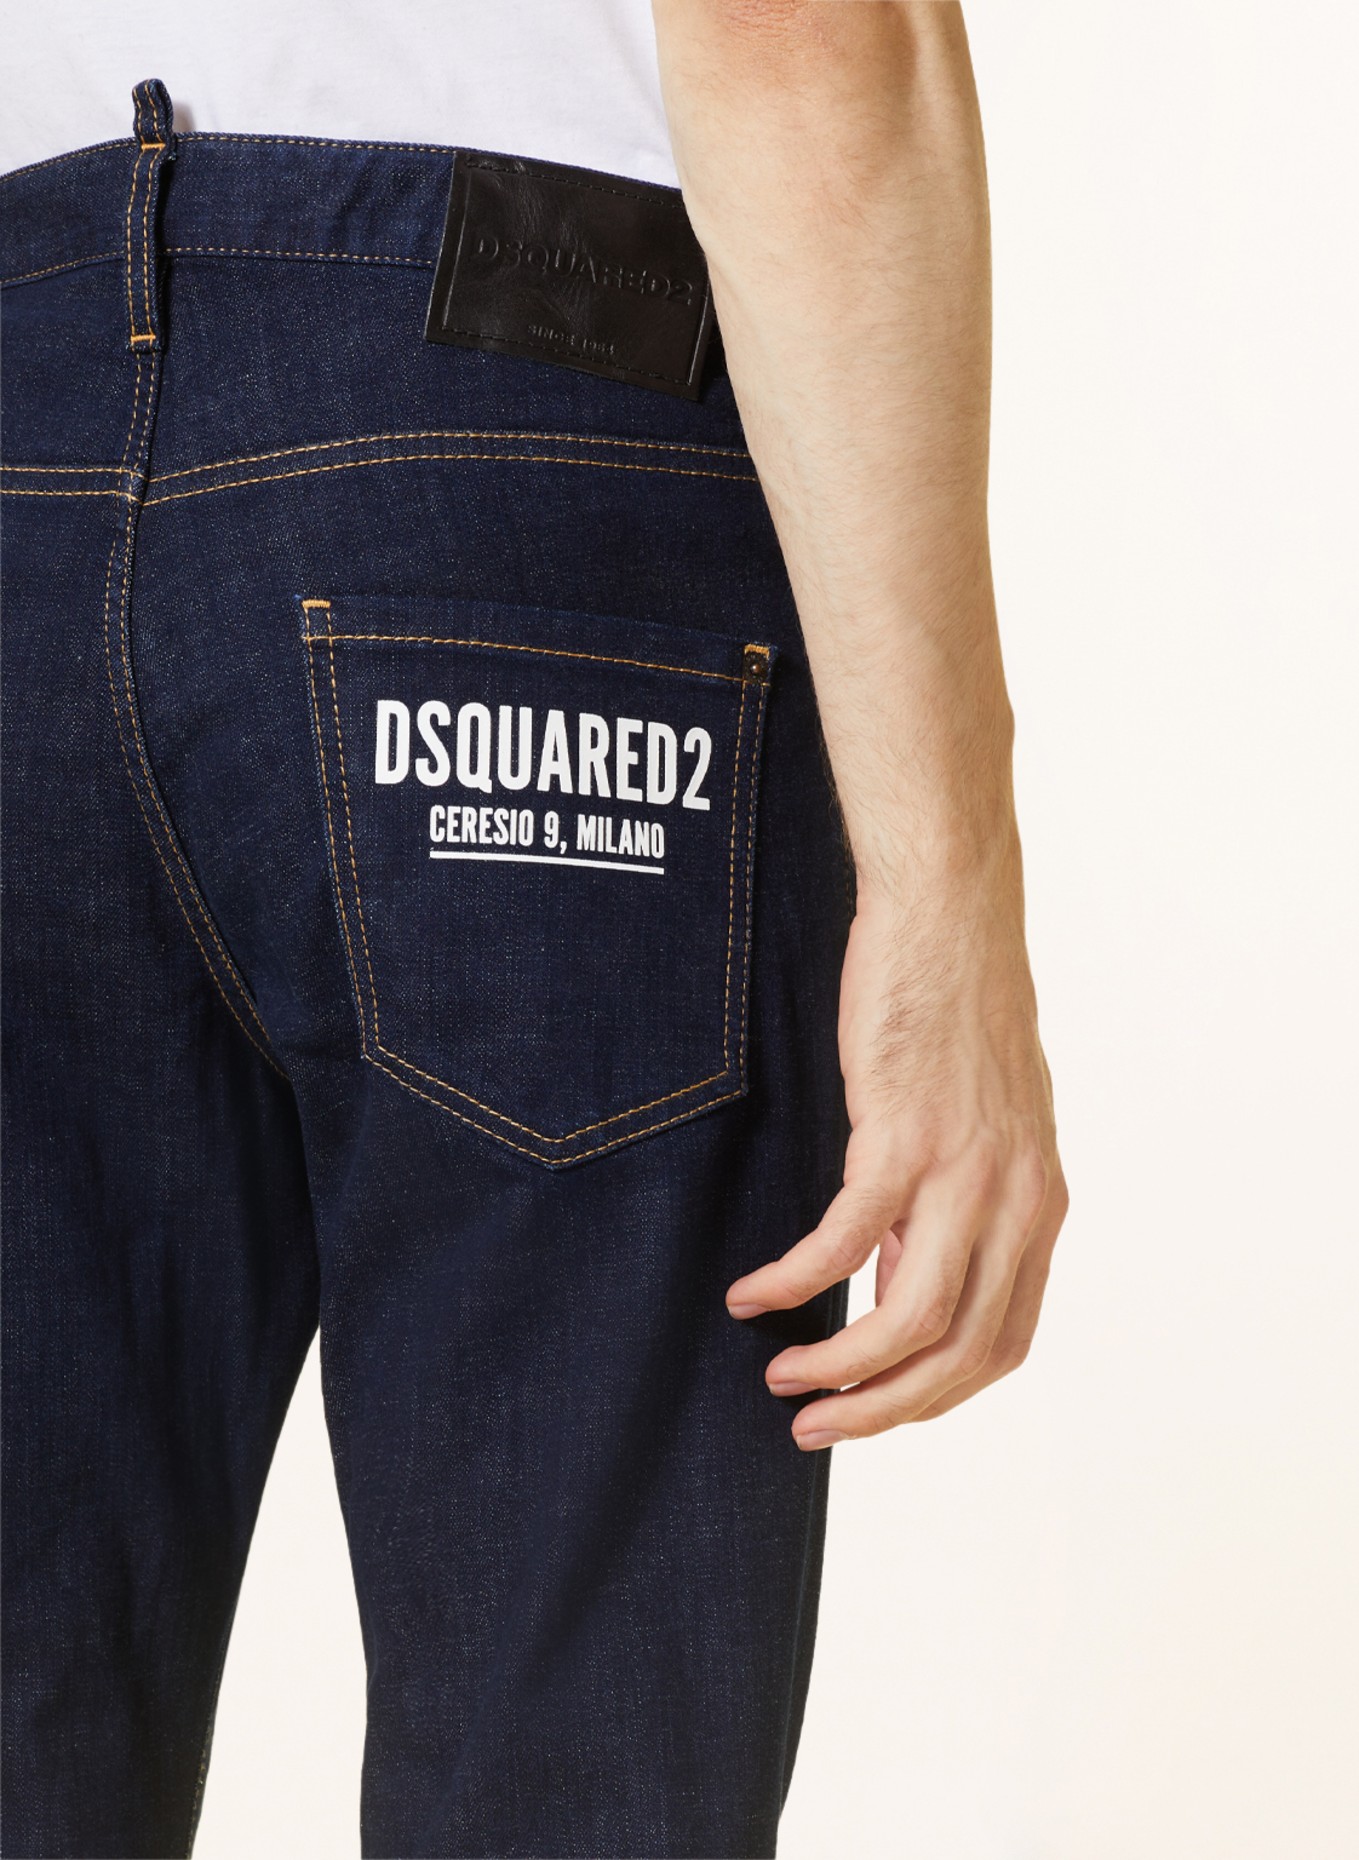 DSQUARED2 Jeans COOL GUY Extra Slim Fit, Farbe: 470 NAVY BLUE (Bild 6)